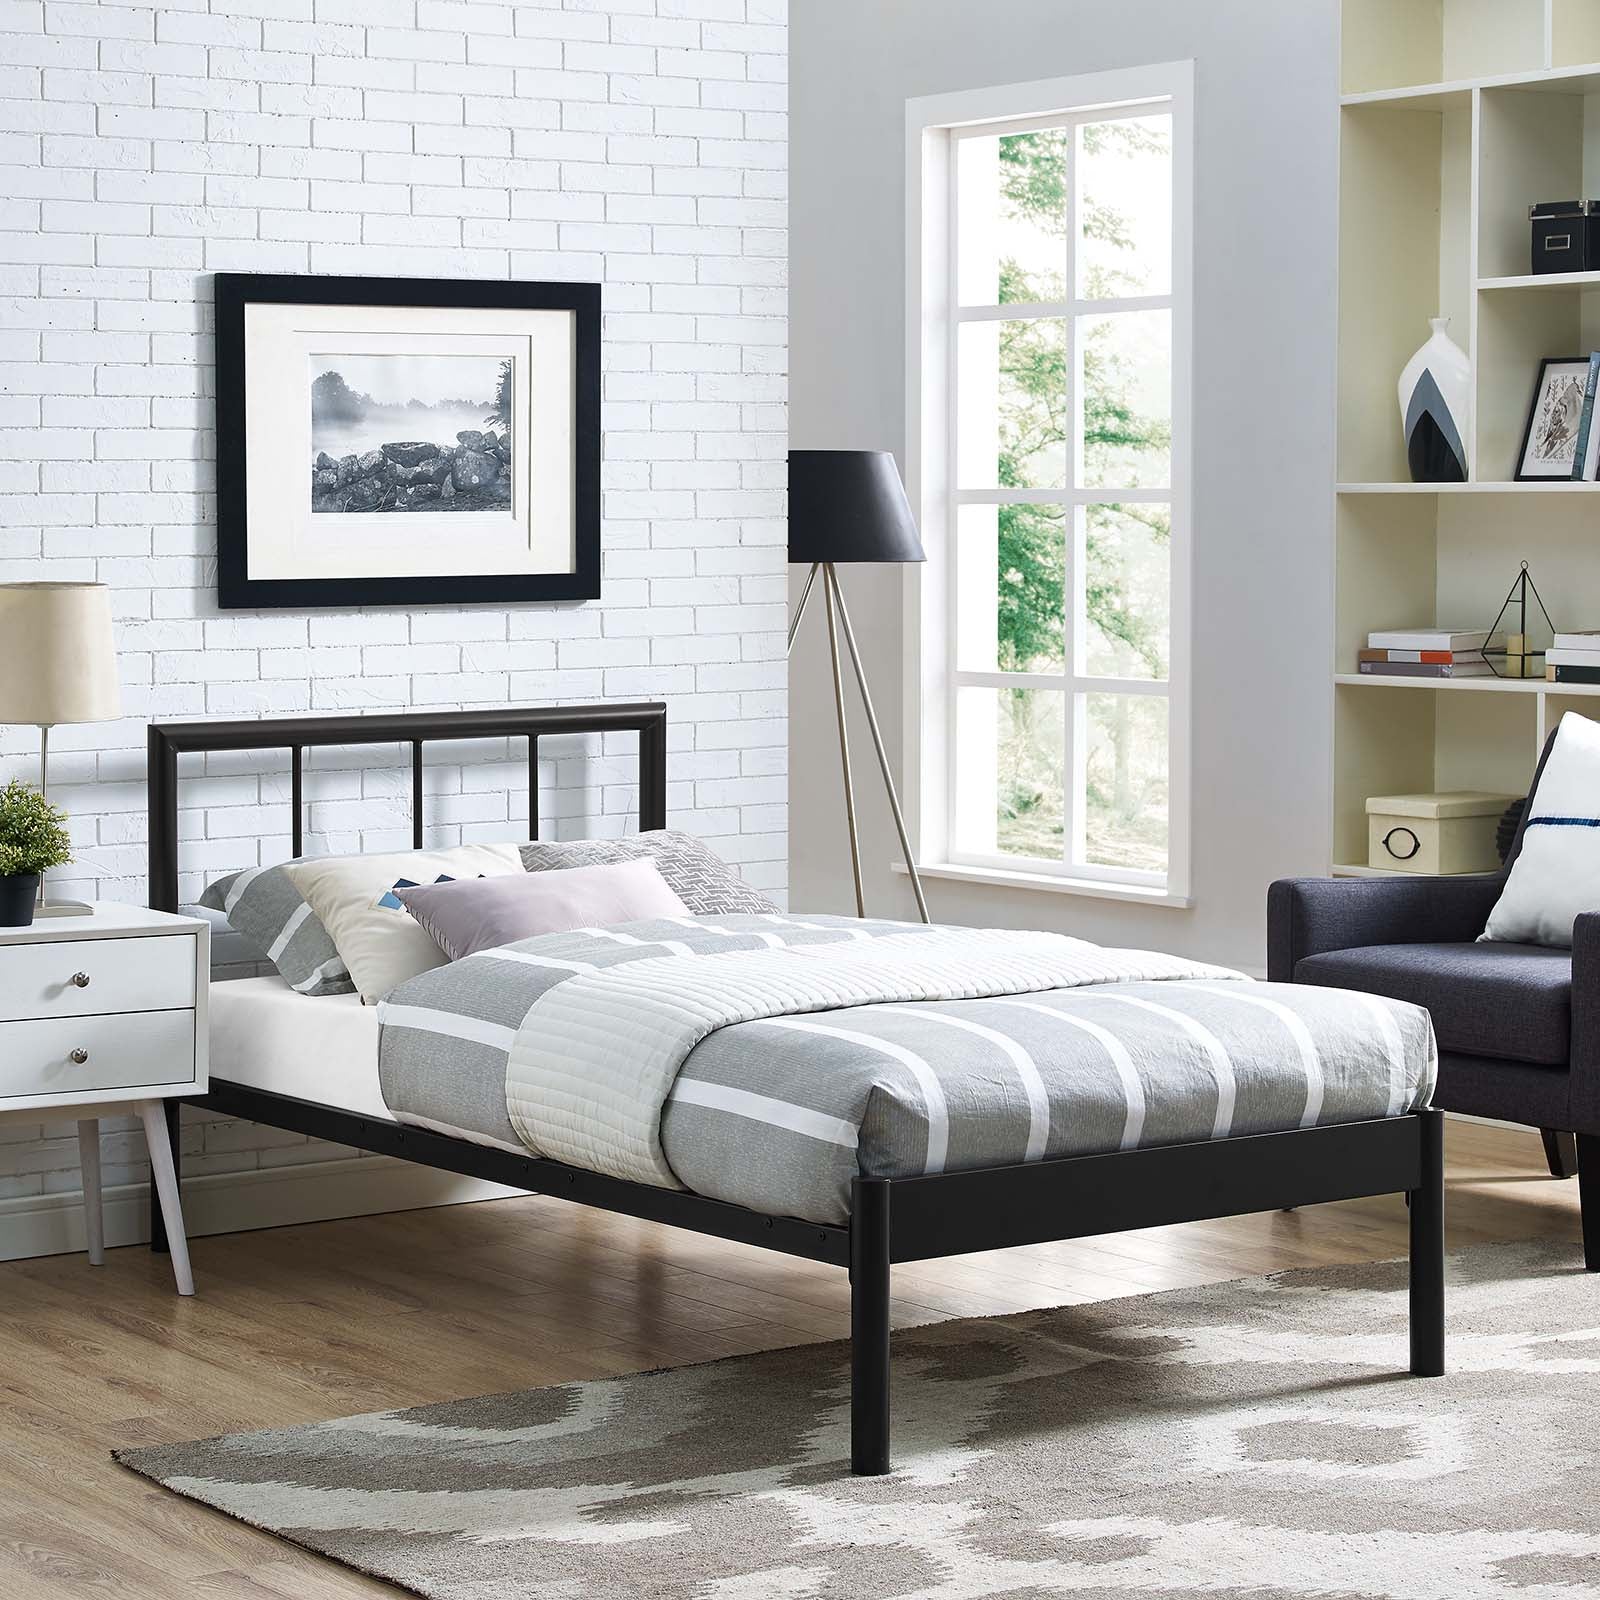 Modway Beds - Gwen Twin Bed Frame Brown